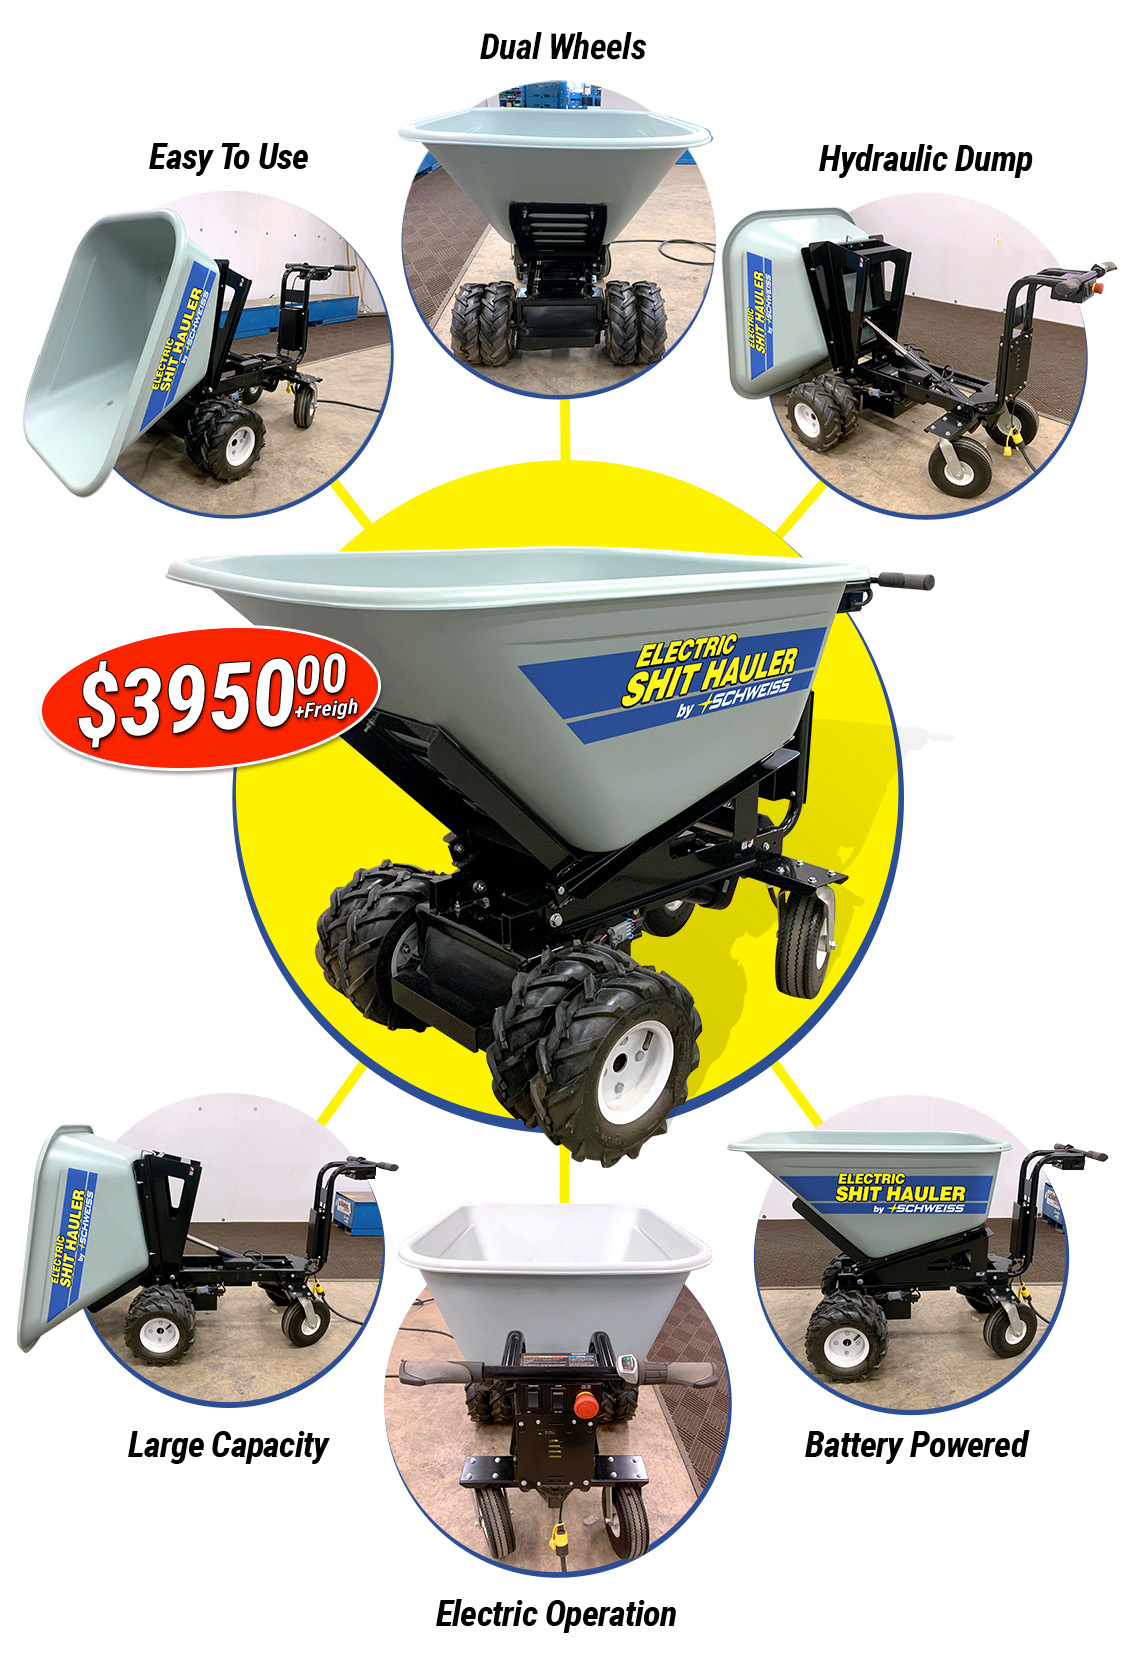 Battery operated Electric Manure Hauler by Schweiss features large capacity, electric operation, ease of use, dual wheels, and hydraulic dump.